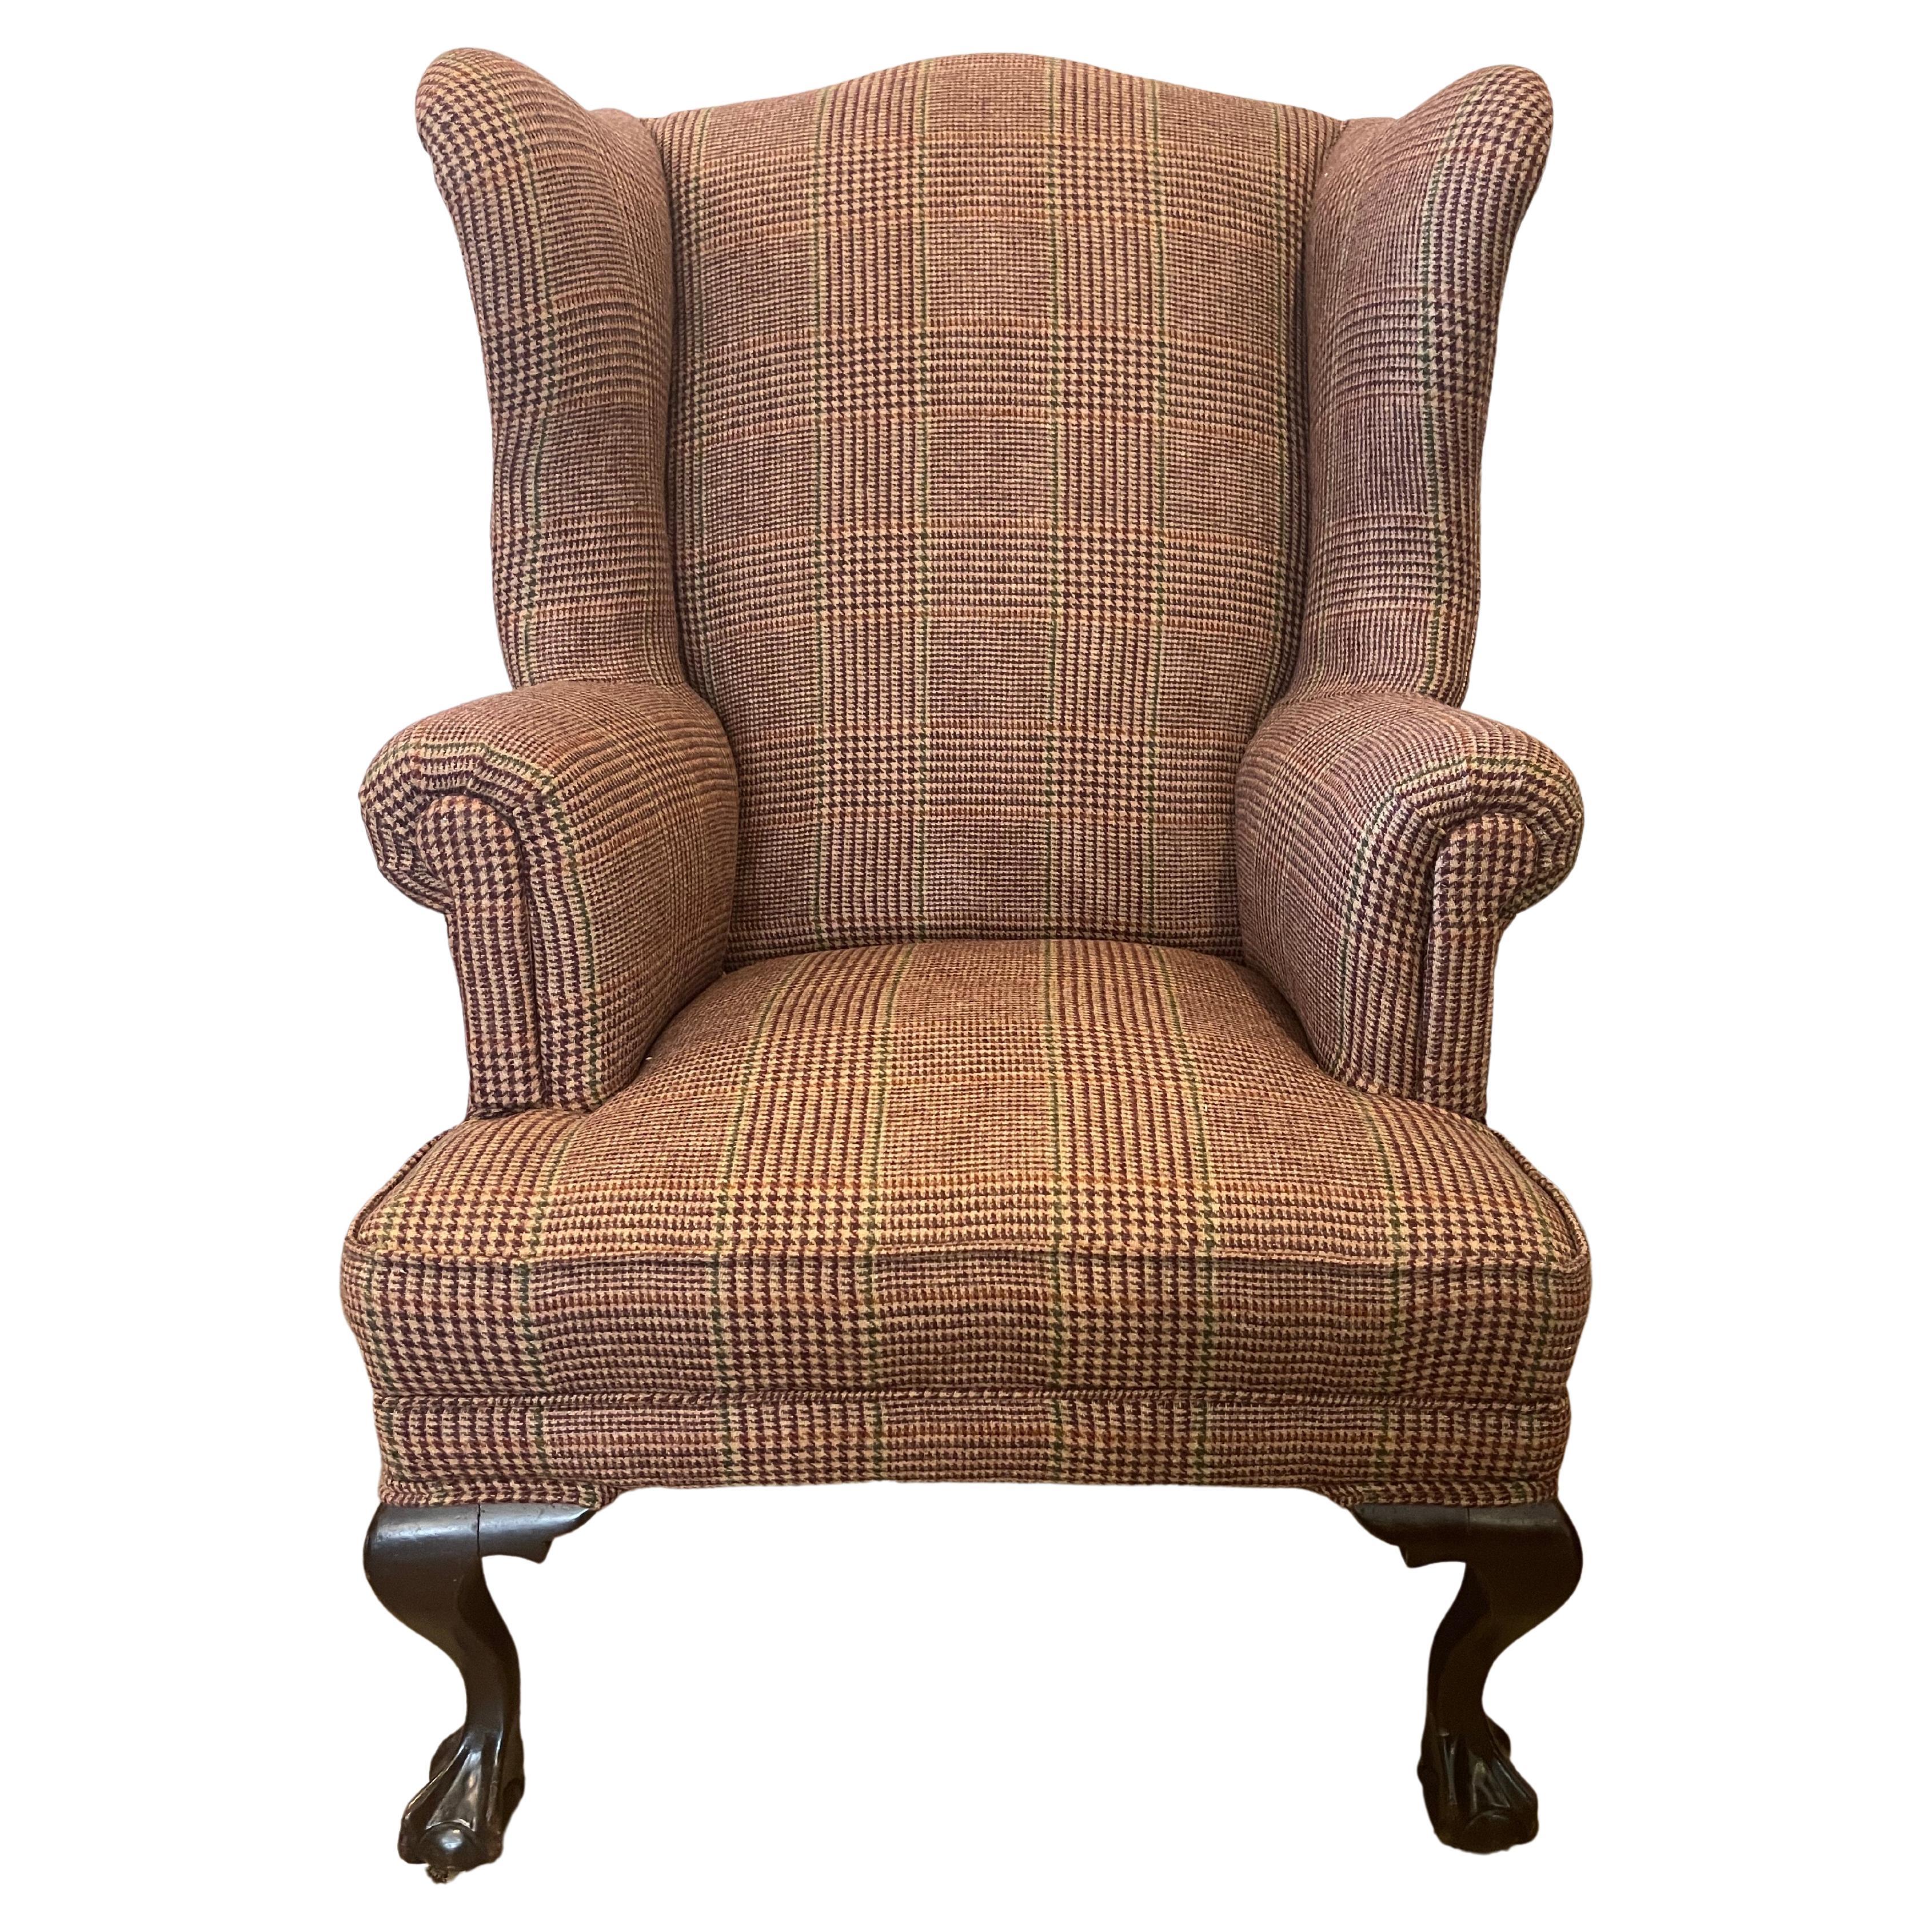 Mahogany Wingback Reading Chair Newly Upholstered with Ralph Lauren Tartan Wool